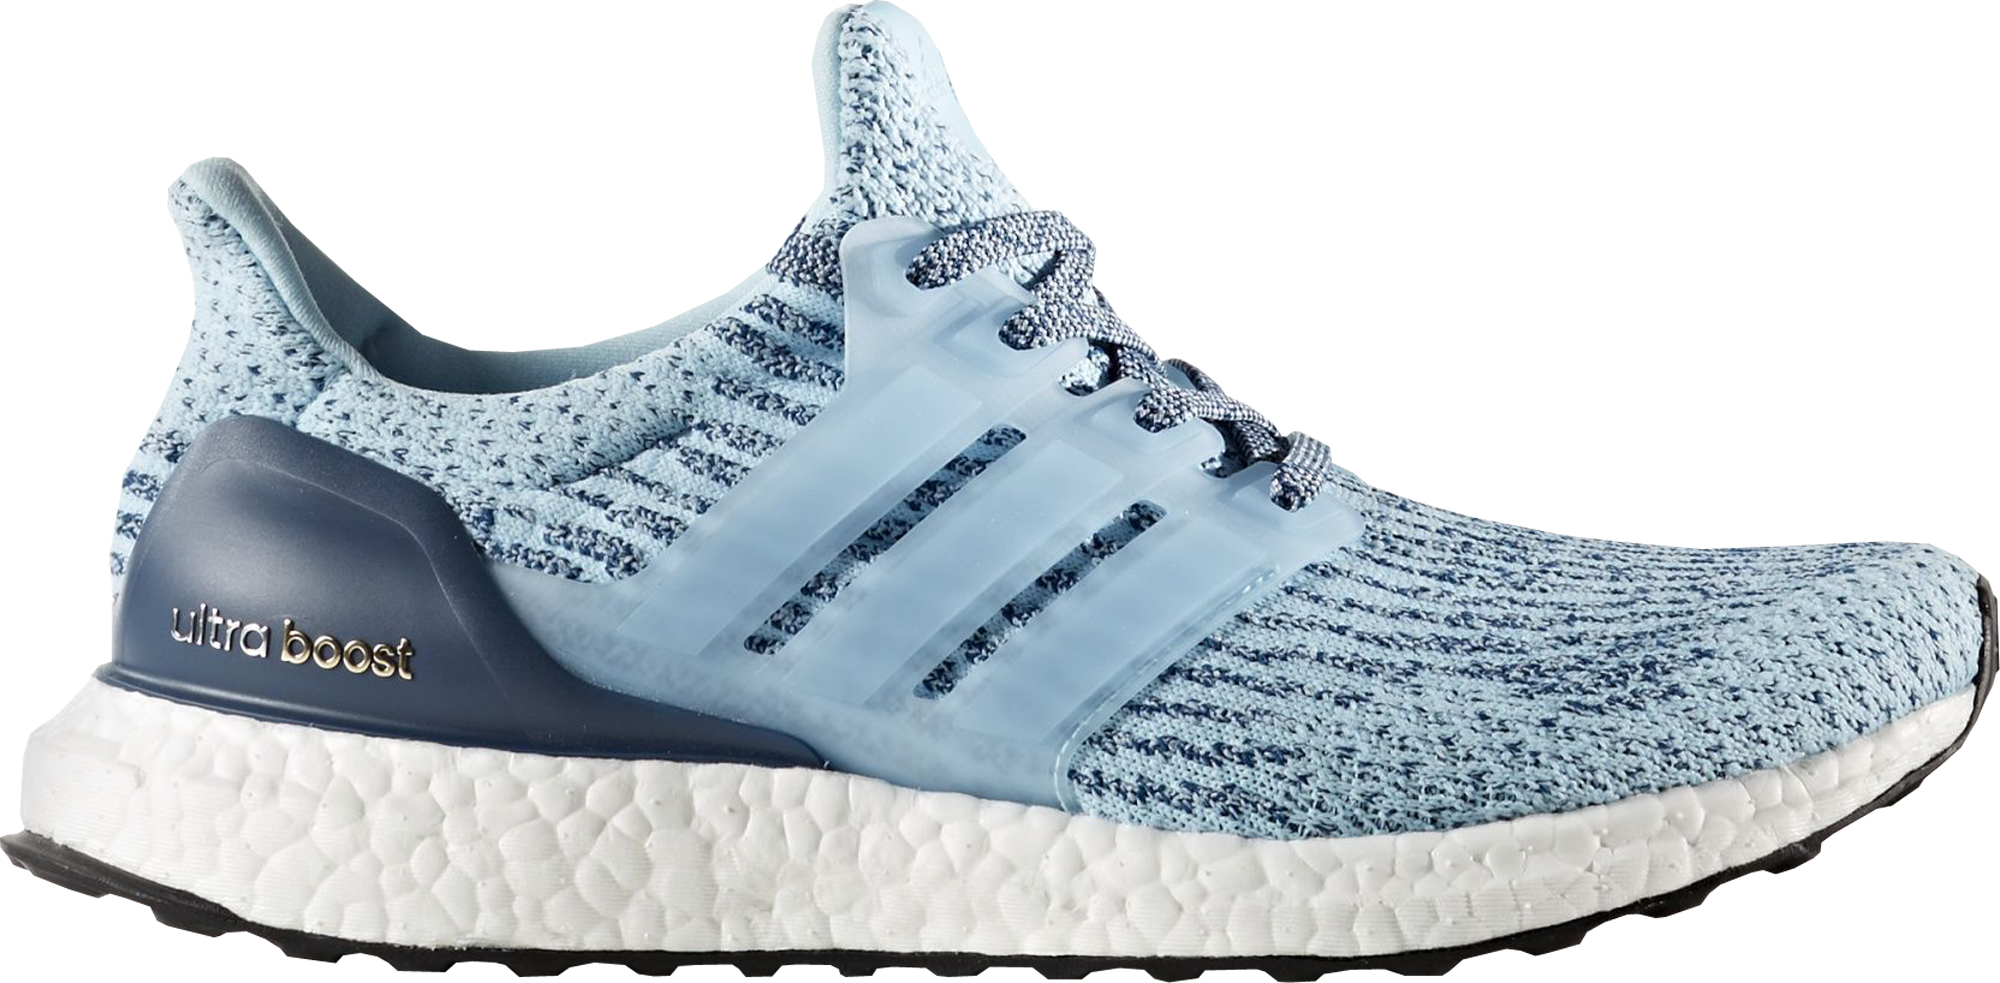 ultra boost white and blue